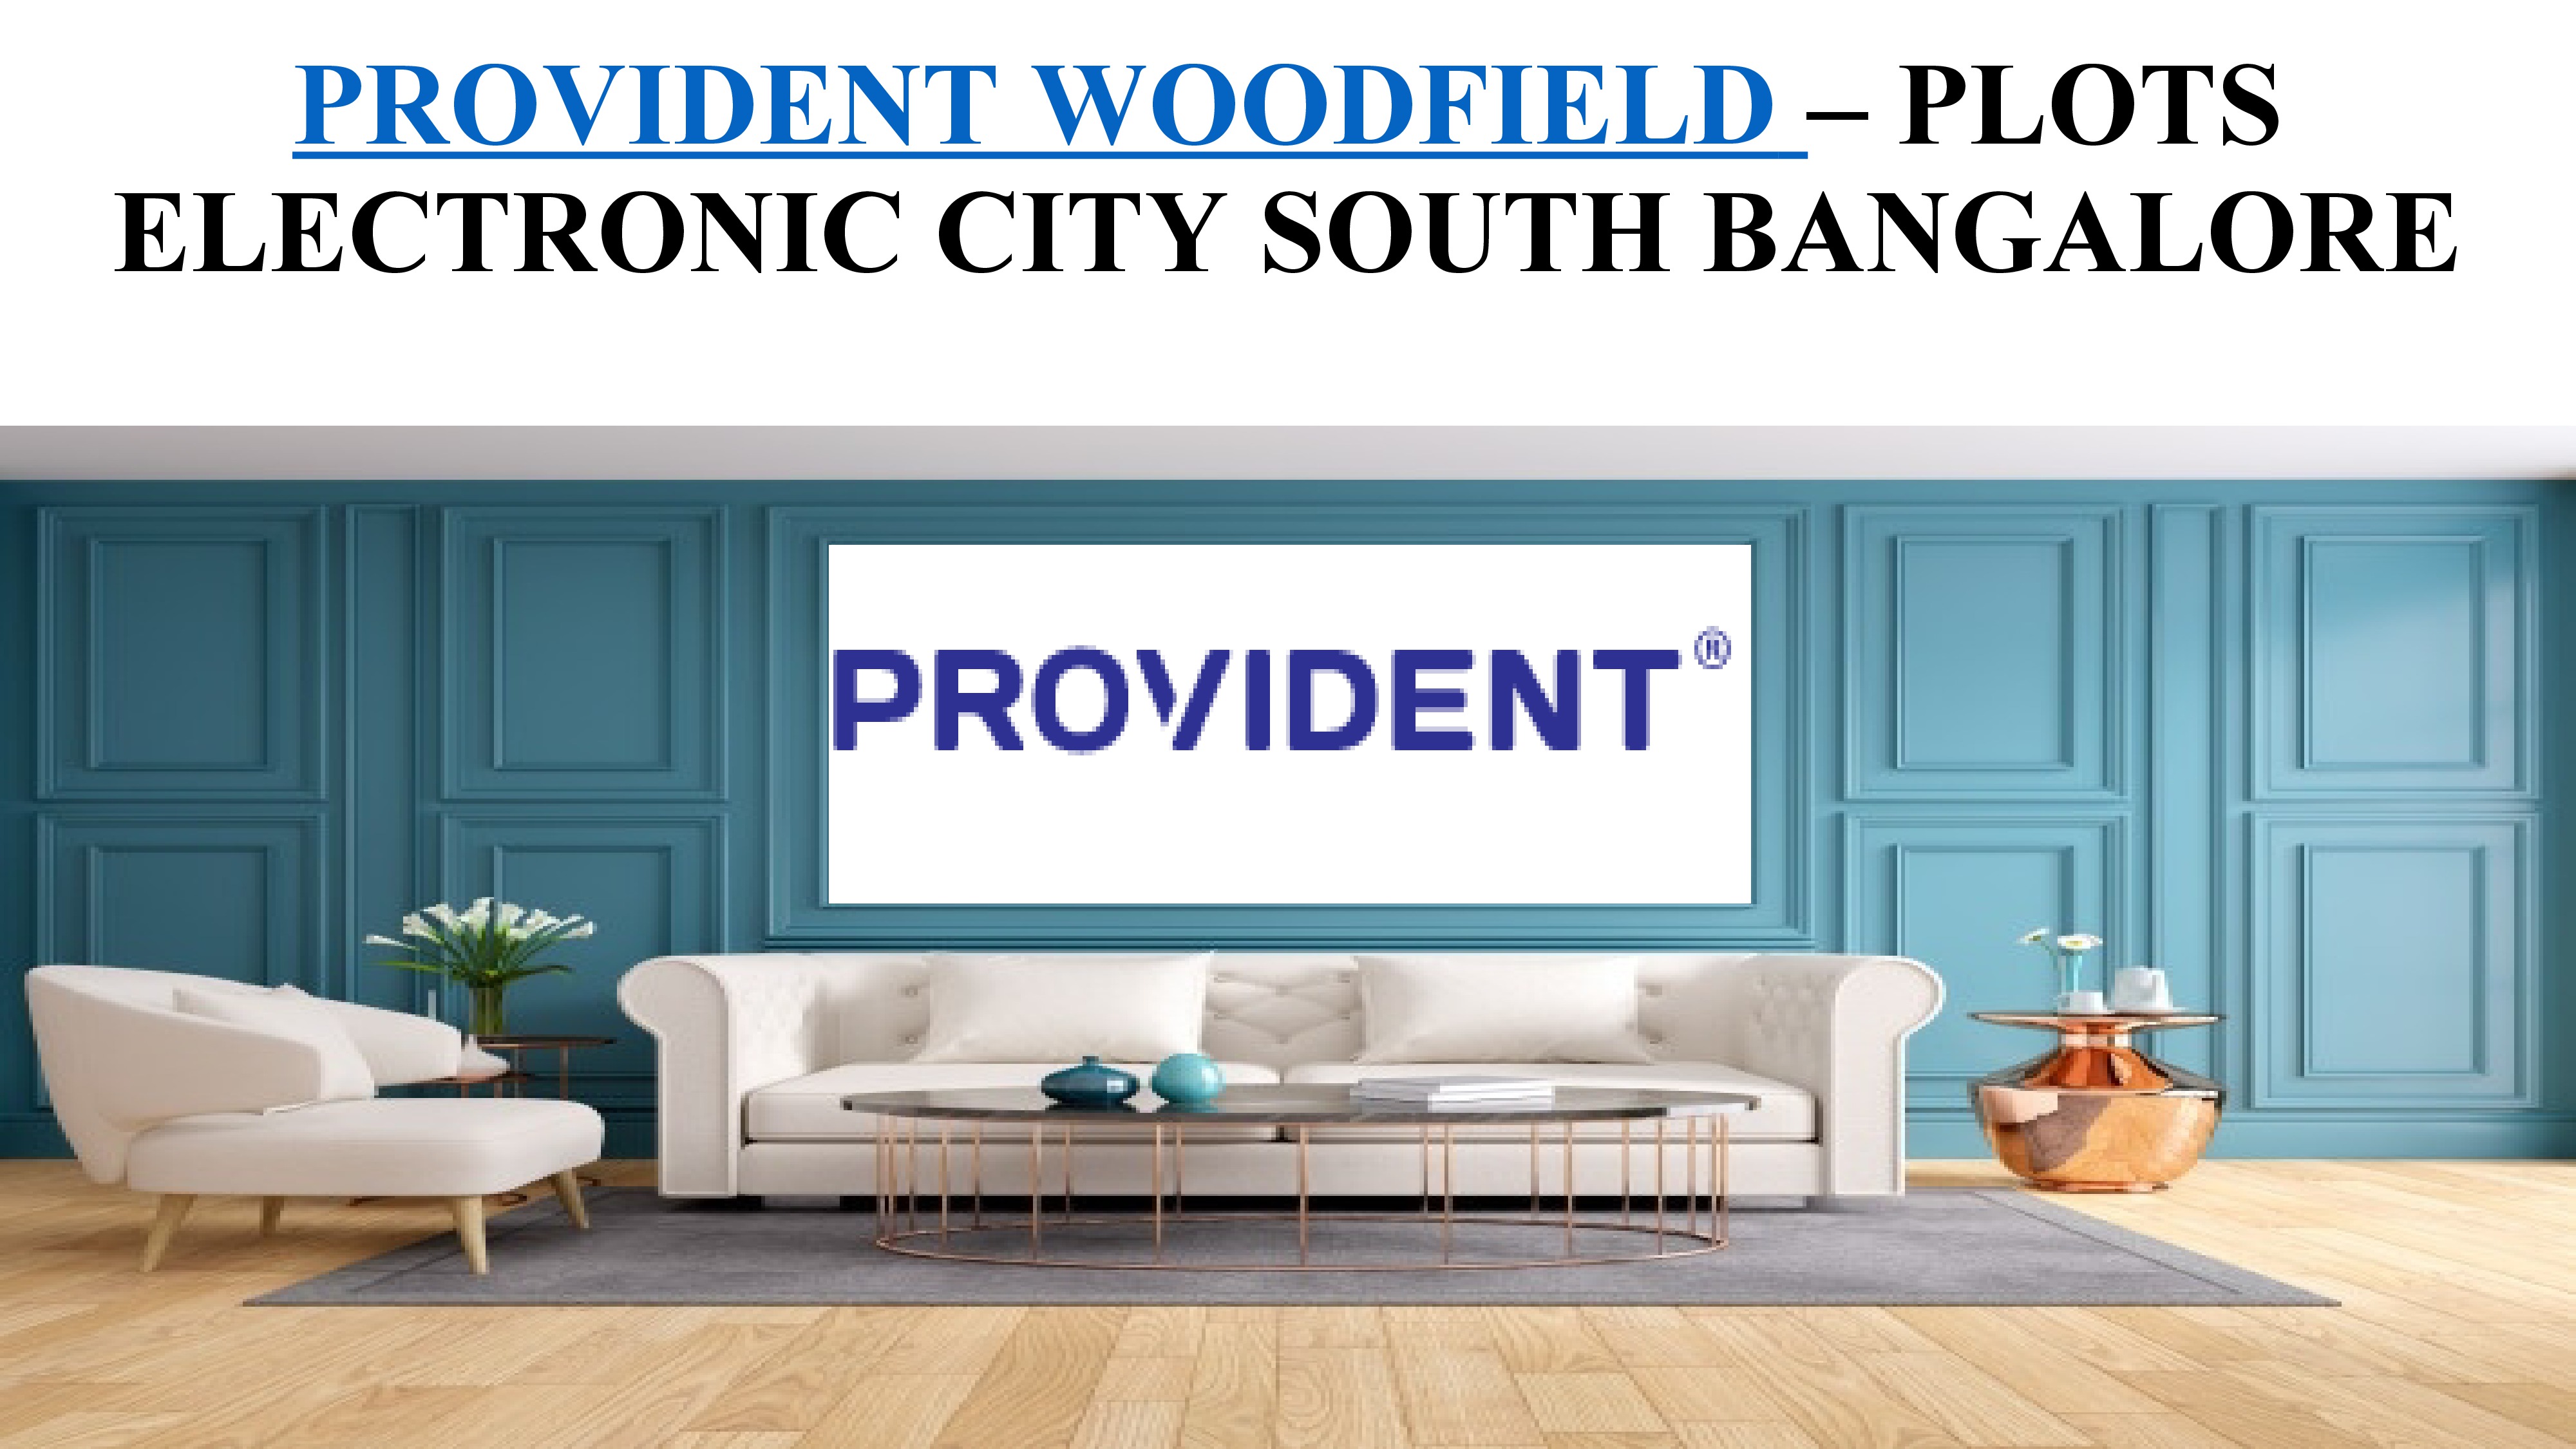 Provident Woodfield at providentwoodfield.org.in